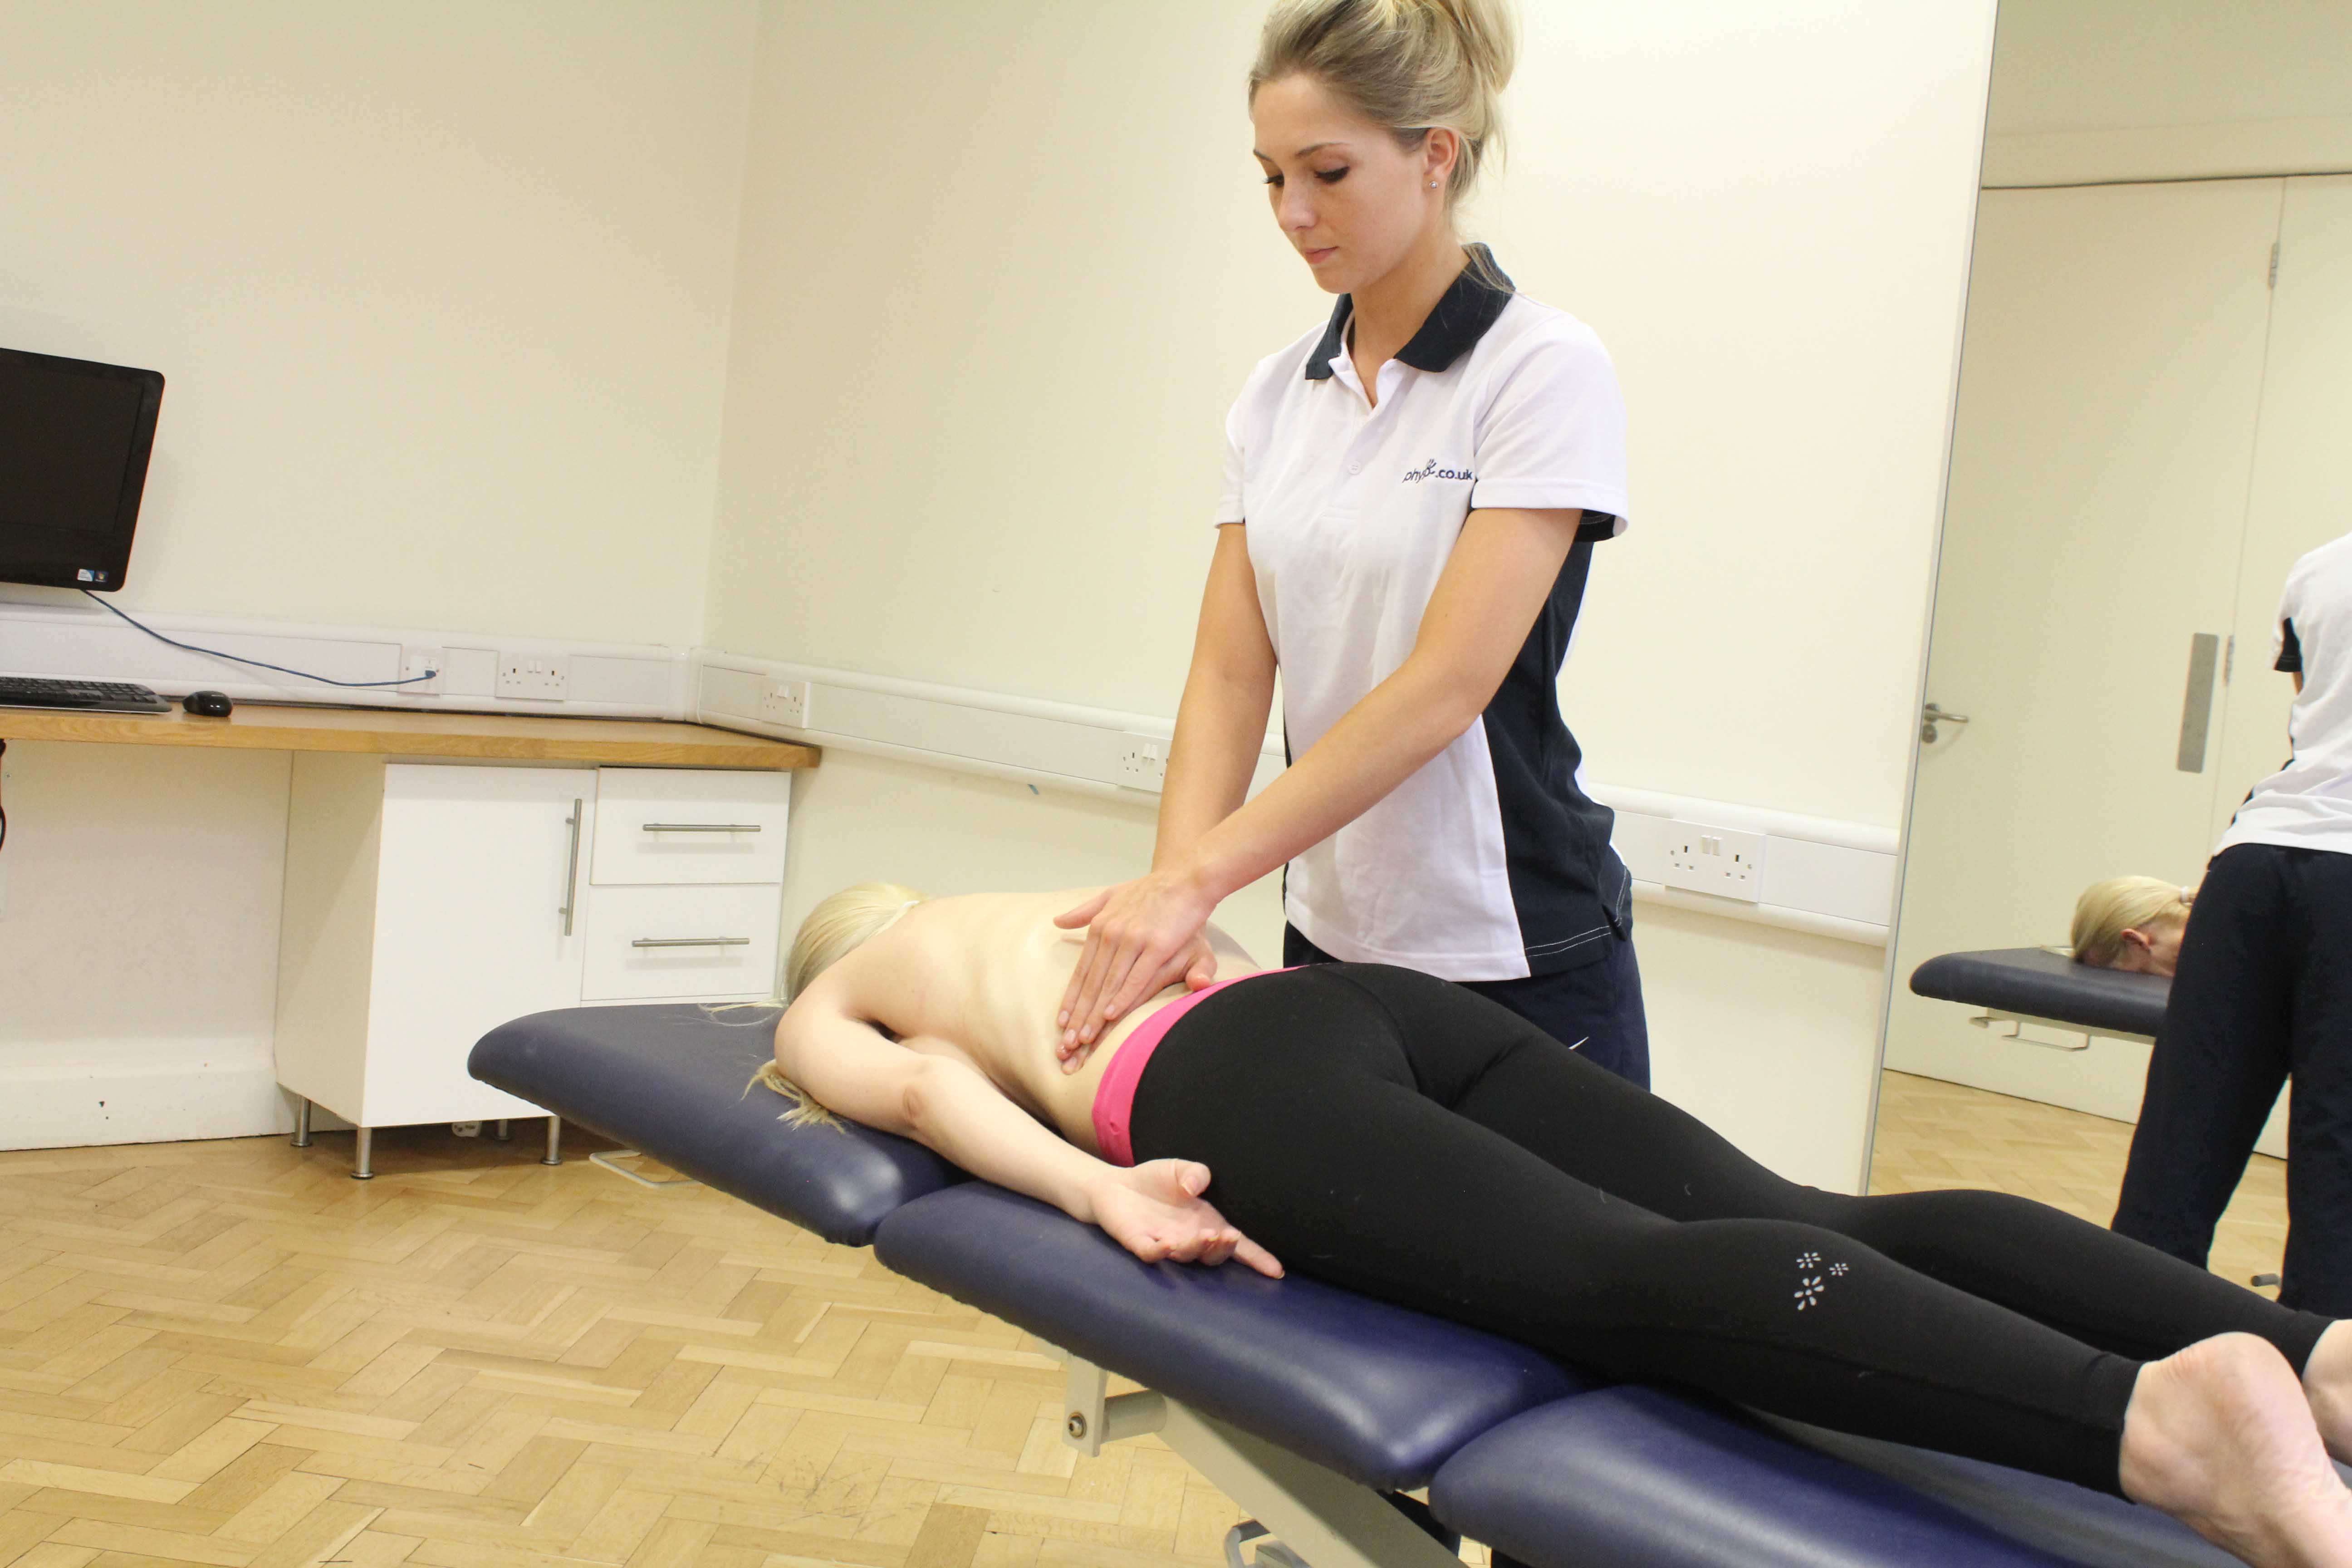 https://www.physio.co.uk/images/low-back-pain/low-back-pain1.jpg